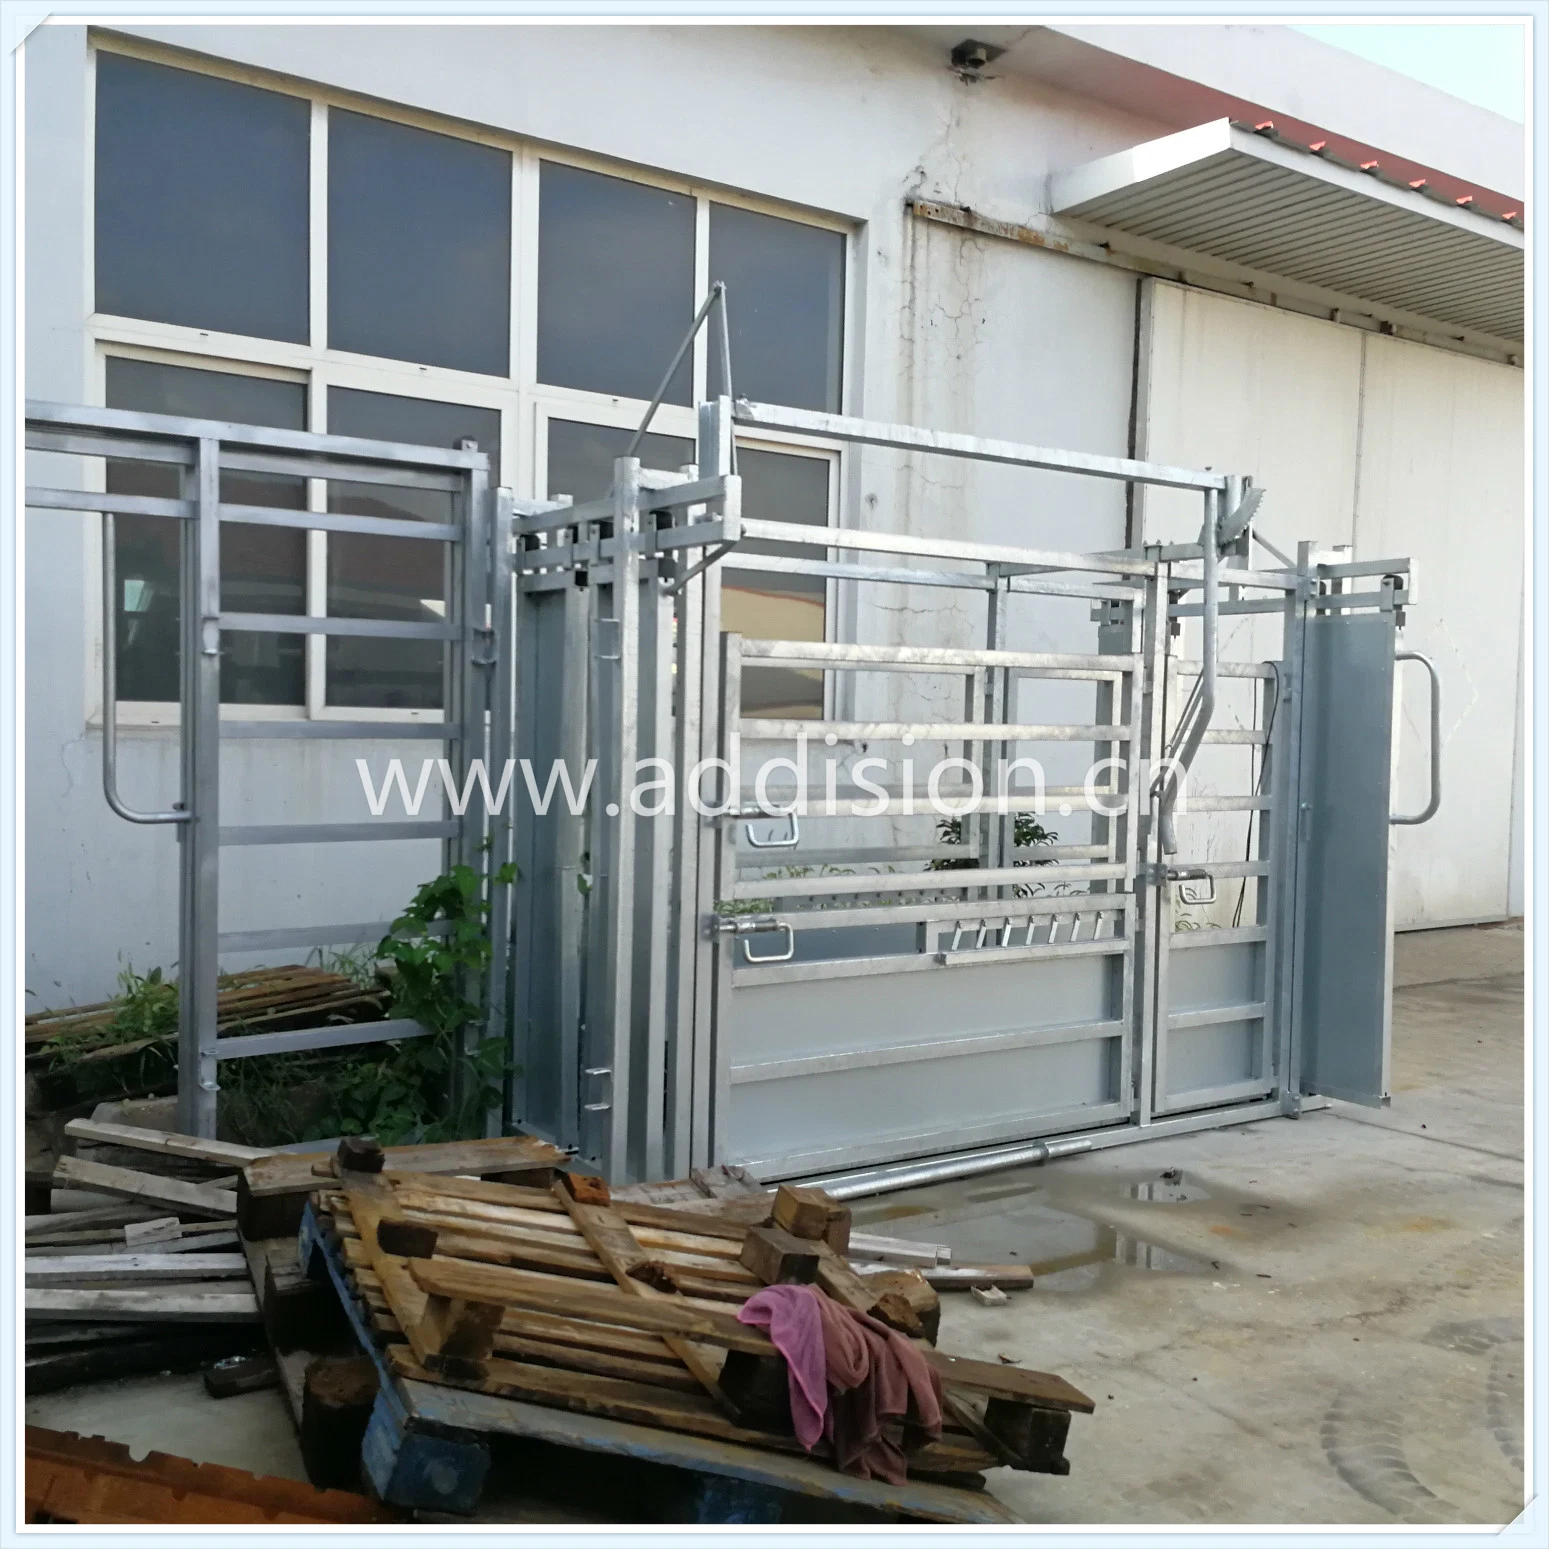 Steel/Aluminium/Wrought Iron Railing Handrail Temporary Fencing Fence / Swing Gate Driveway Gate Cattle Sliding Gate with Cattle Scale